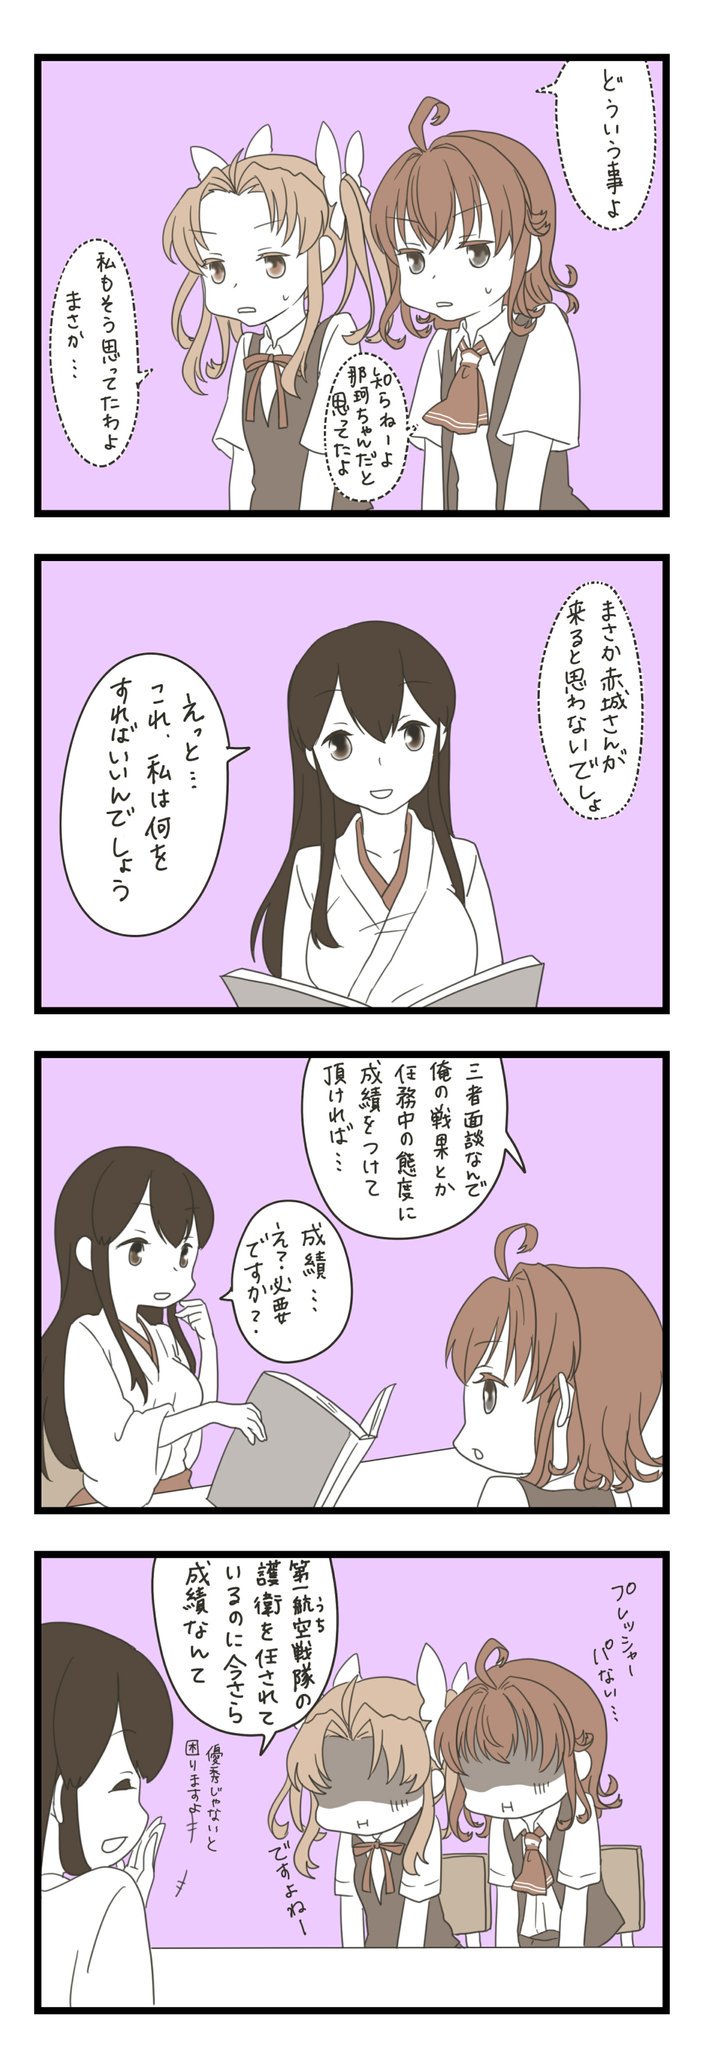 3girls 4koma ahoge akagi_(kantai_collection) arashi_(kantai_collection) bangs black_vest blouse book breasts closed_eyes comic commentary_request hakama_skirt highres holding holding_book japanese_clothes kagerou_(kantai_collection) kantai_collection large_breasts laughing long_hair mocchi_(mocchichani) monochrome multiple_girls neck_ribbon open_book open_eyes open_mouth ribbon school_uniform shaded_face shirt short_hair sitting smile speech_bubble straight_hair sweatdrop table thought_bubble translation_request twintails vest white_shirt